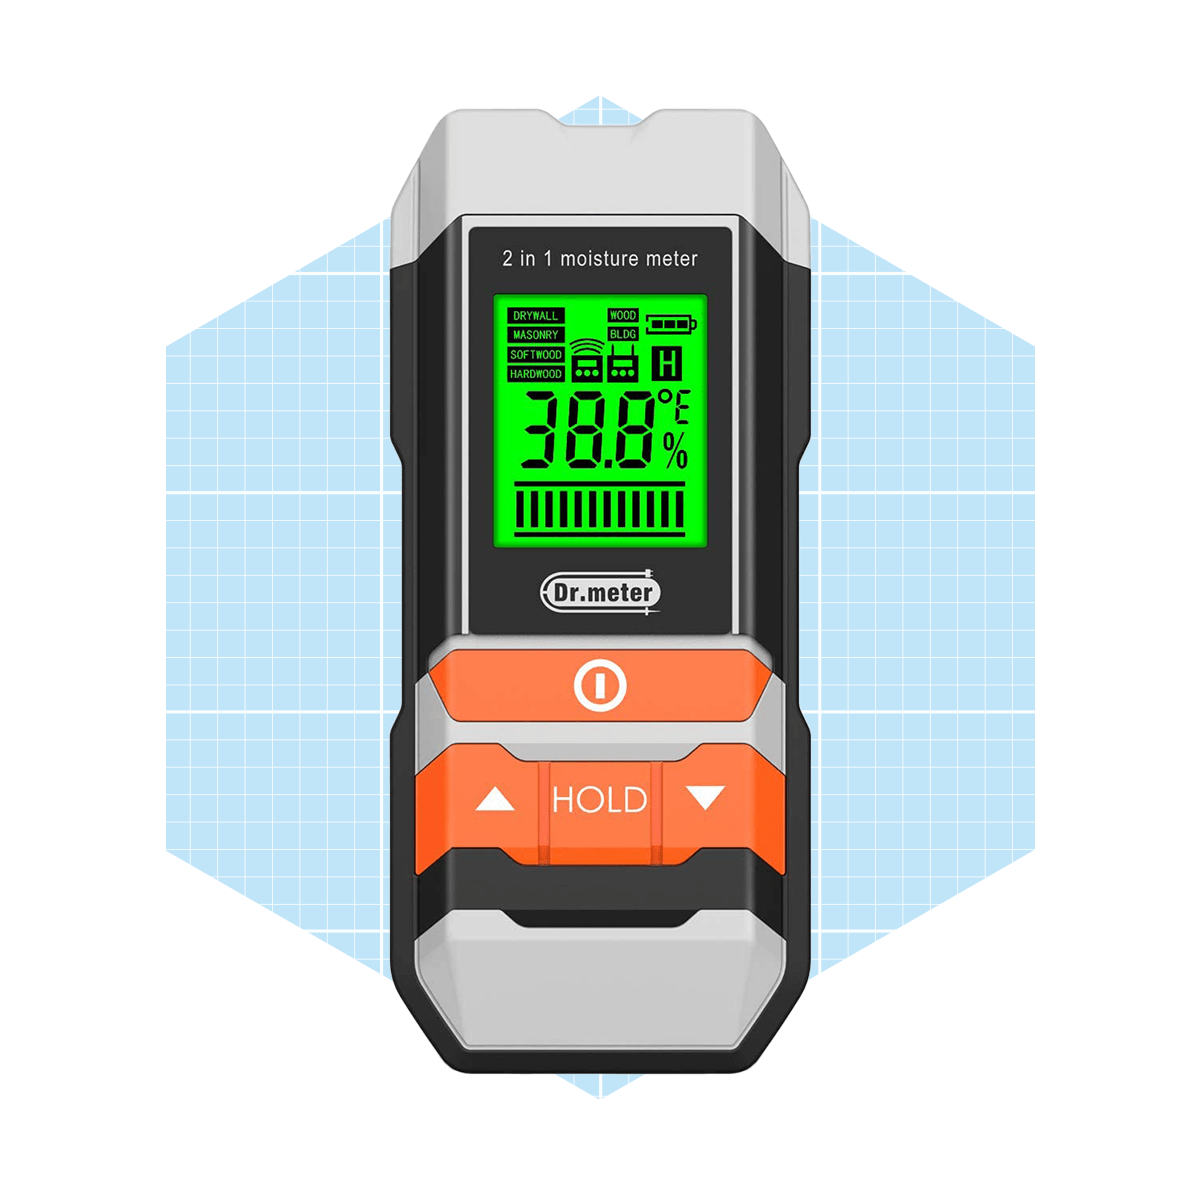 The Top 7 Moisture Meters For Drywall, Concrete, and Wood